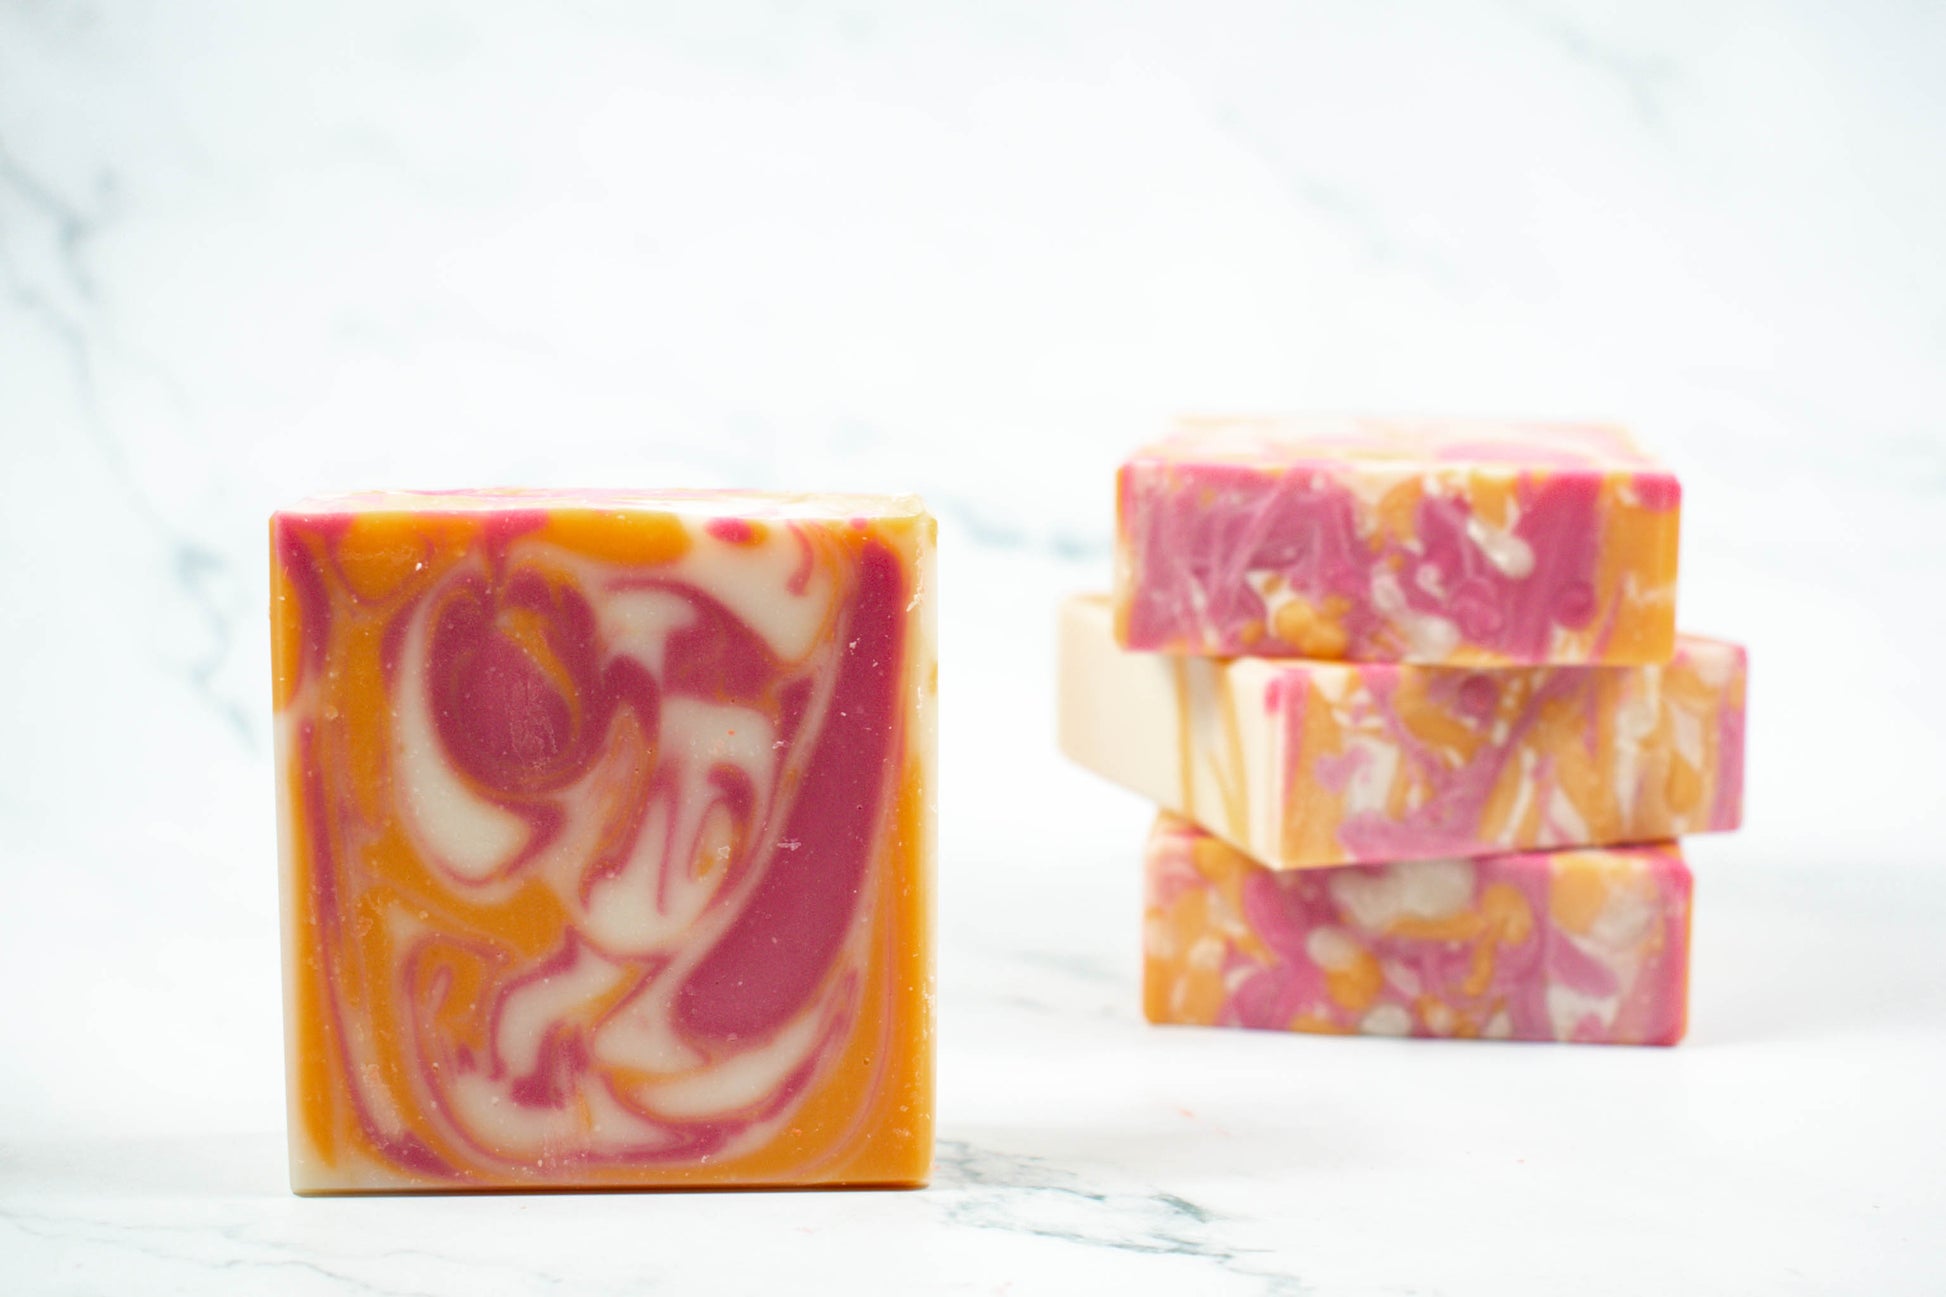 Orange, pink, and white swirls in the soap with 1 in front and 3 soaps in the back.